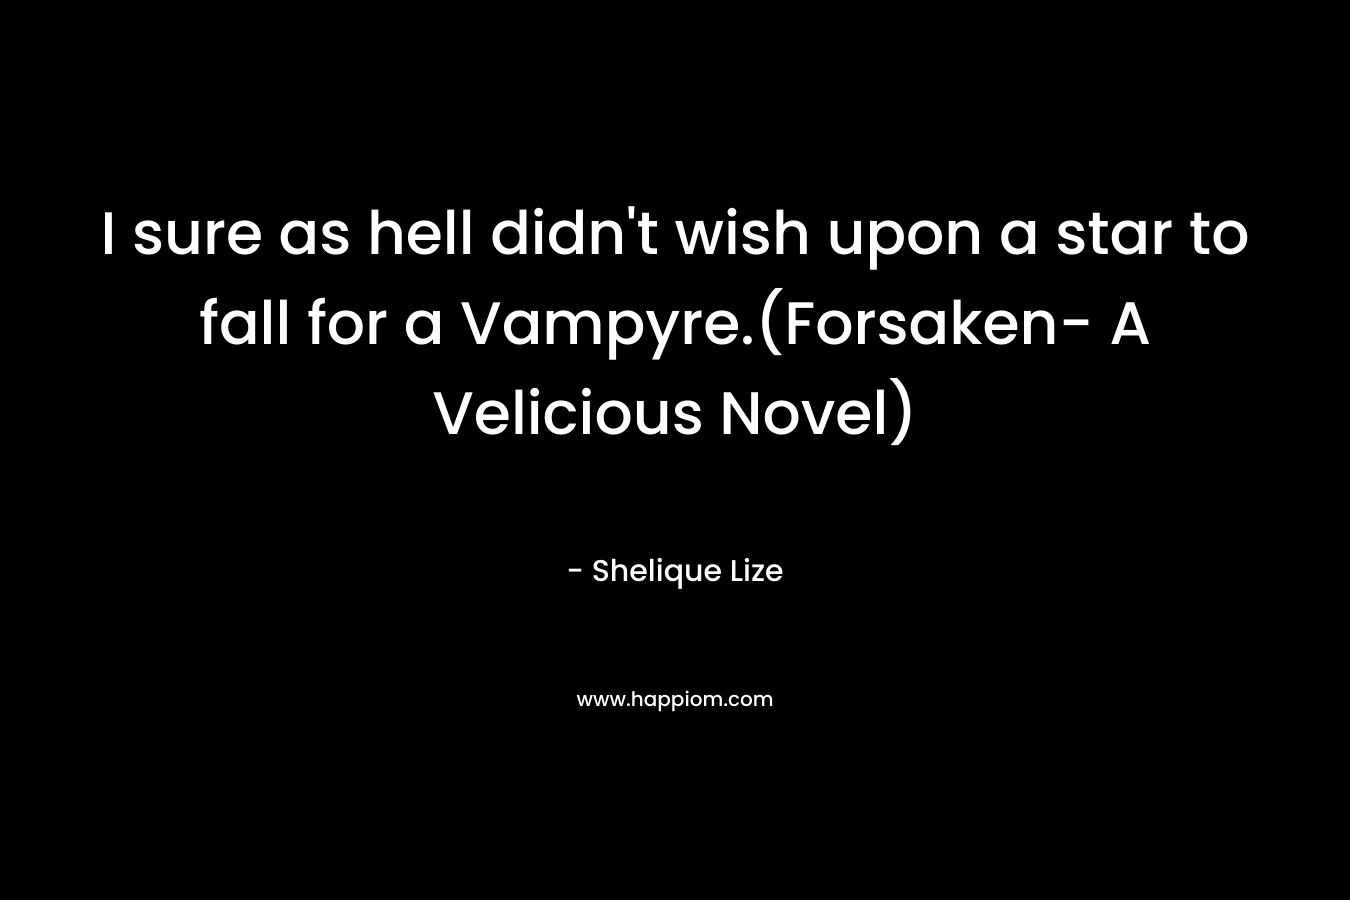 I sure as hell didn't wish upon a star to fall for a Vampyre.(Forsaken- A Velicious Novel)